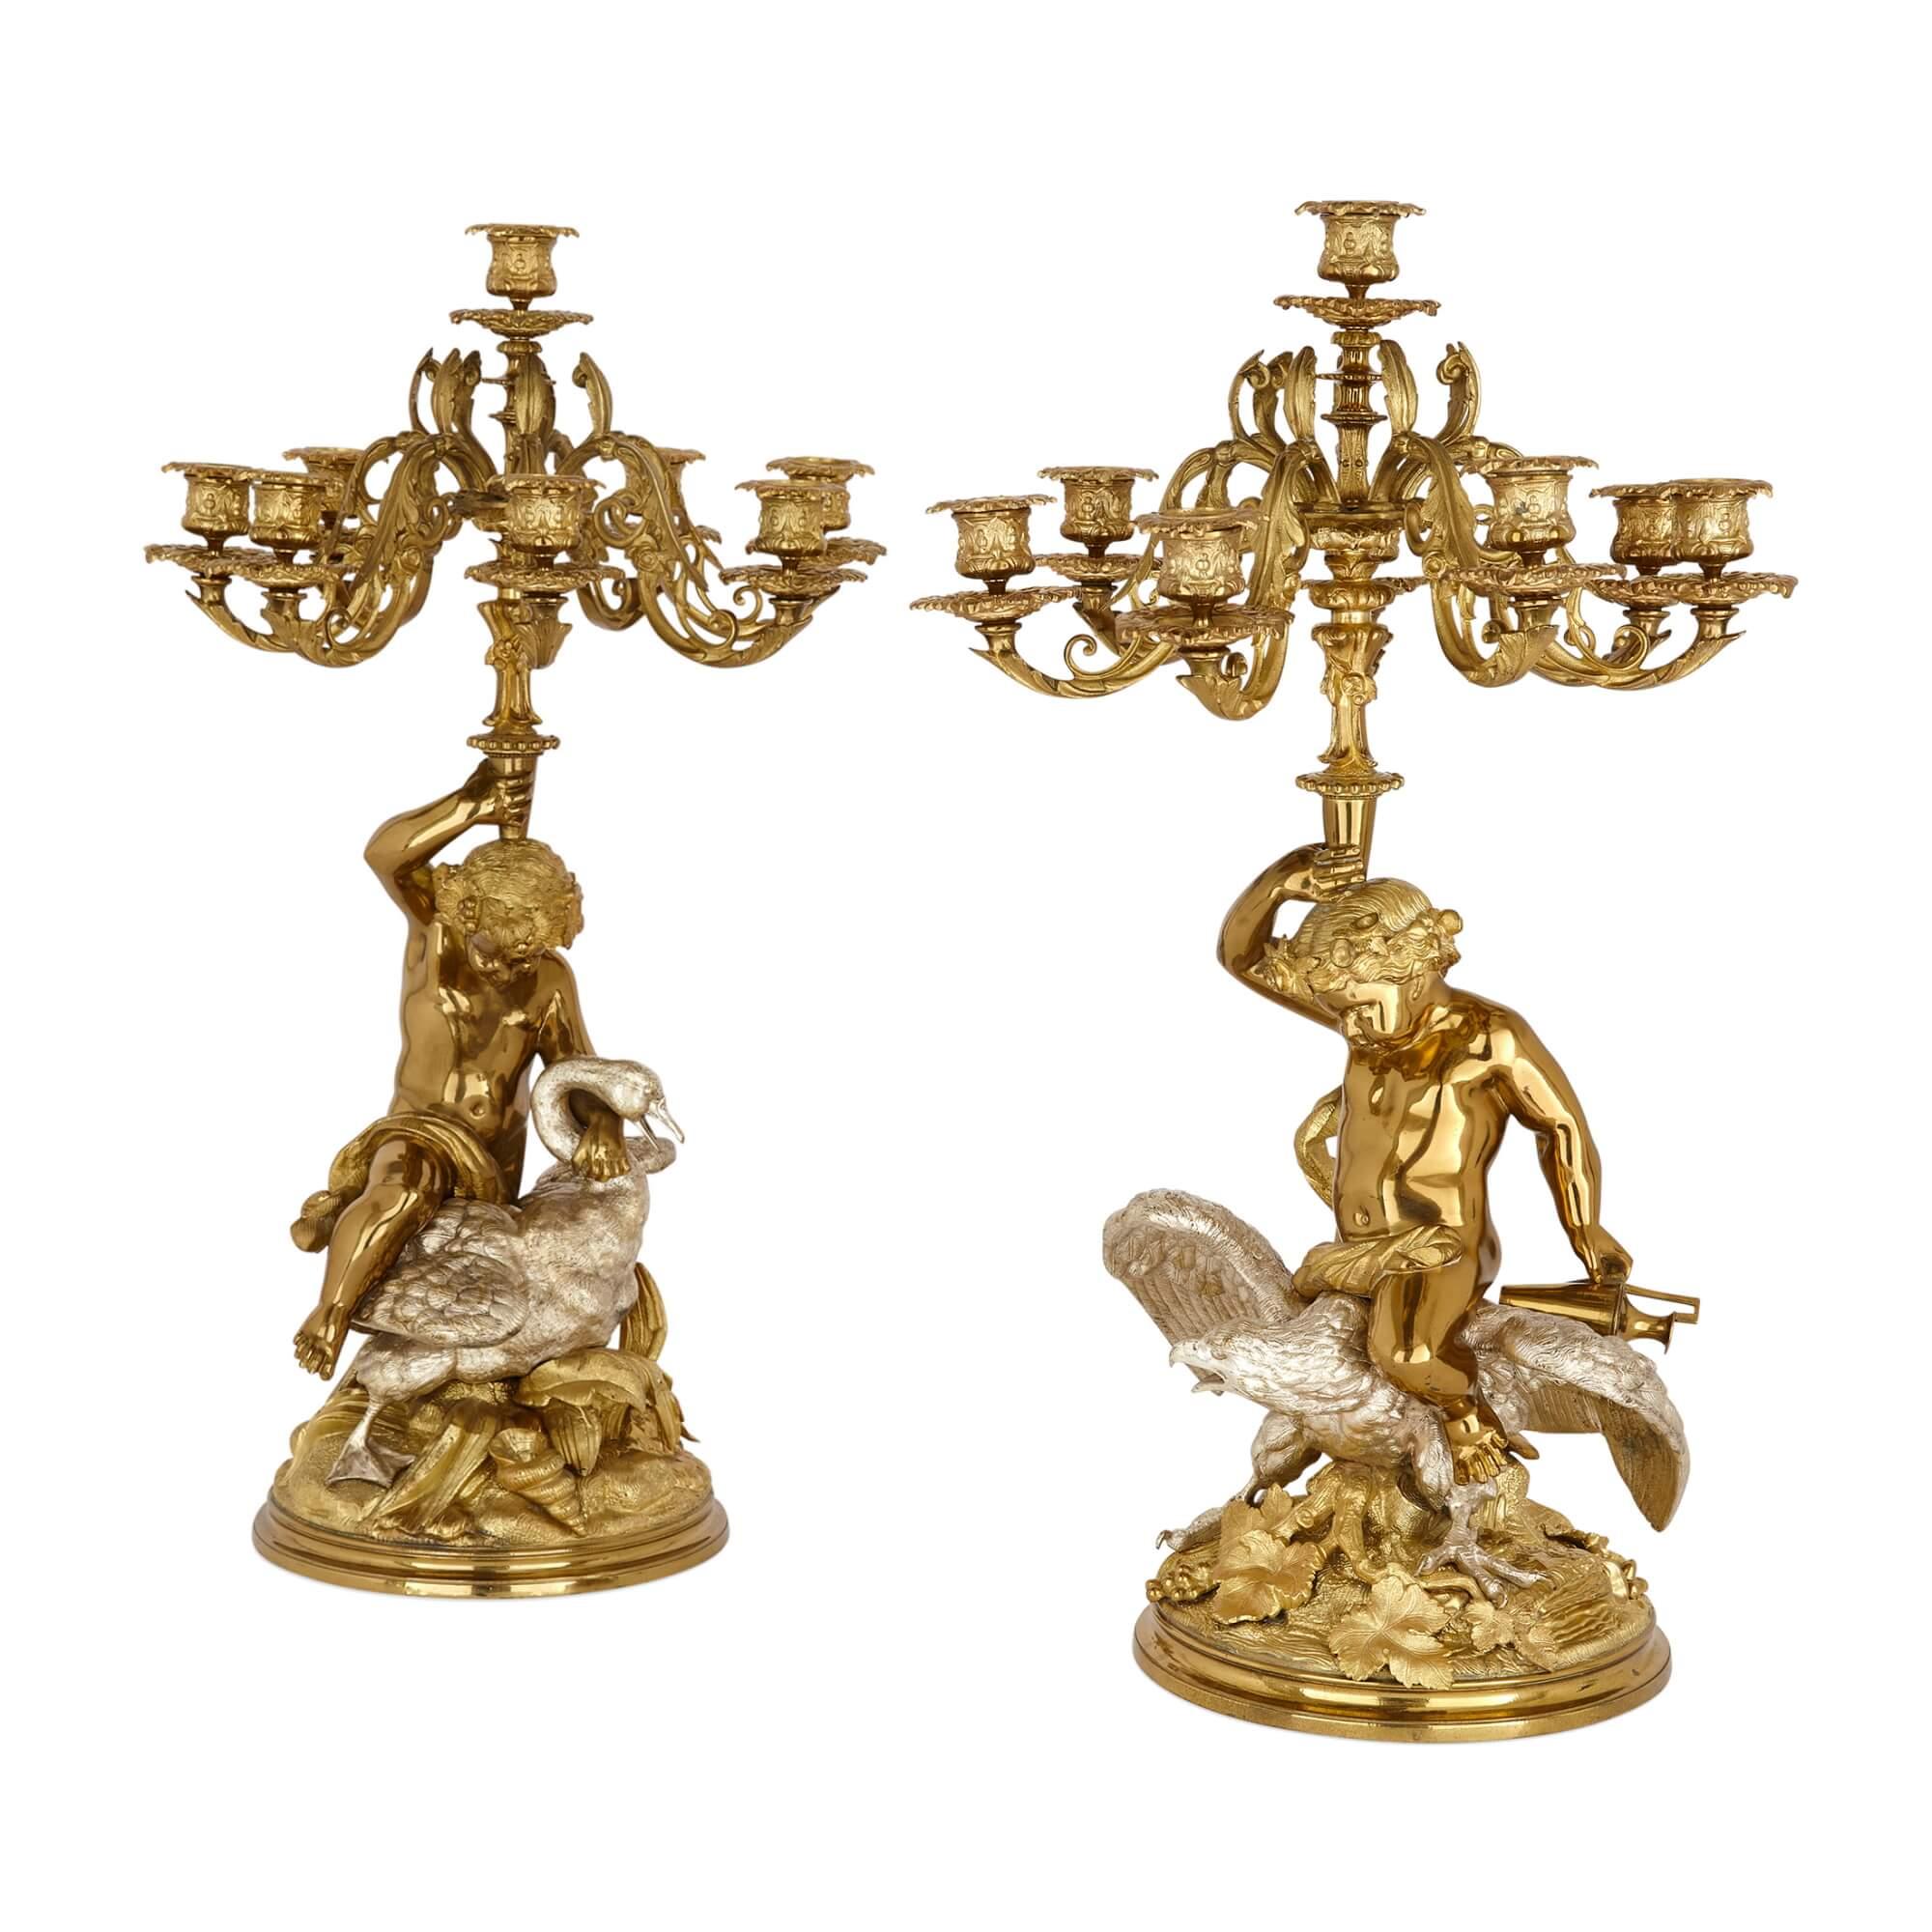 Pair of French silvered and gilt bronze candelabra 
French, Late 19th Century
Height 64cm, width 37cm, depth 37cm

Crafted in the 19th century, this pair of French candelabra exudes unmatched elegance, with their central decorative figures drawing